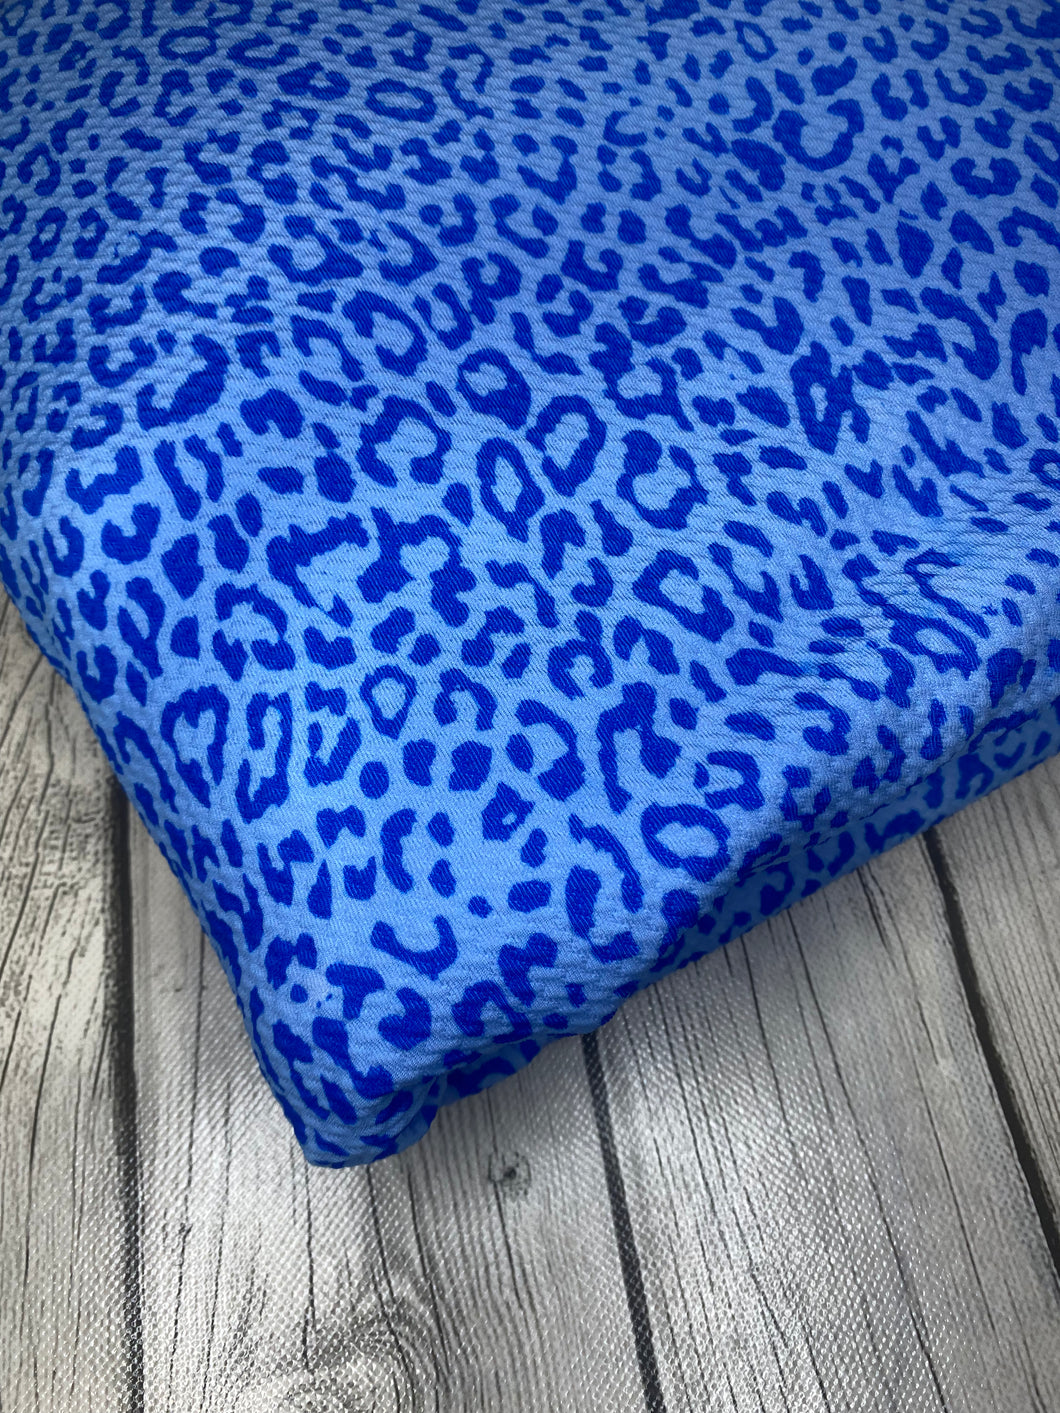 Pre-Cut Bullet Blue Cheetah Animals for headwraps, bows on nylons or clips 5.5-6x60